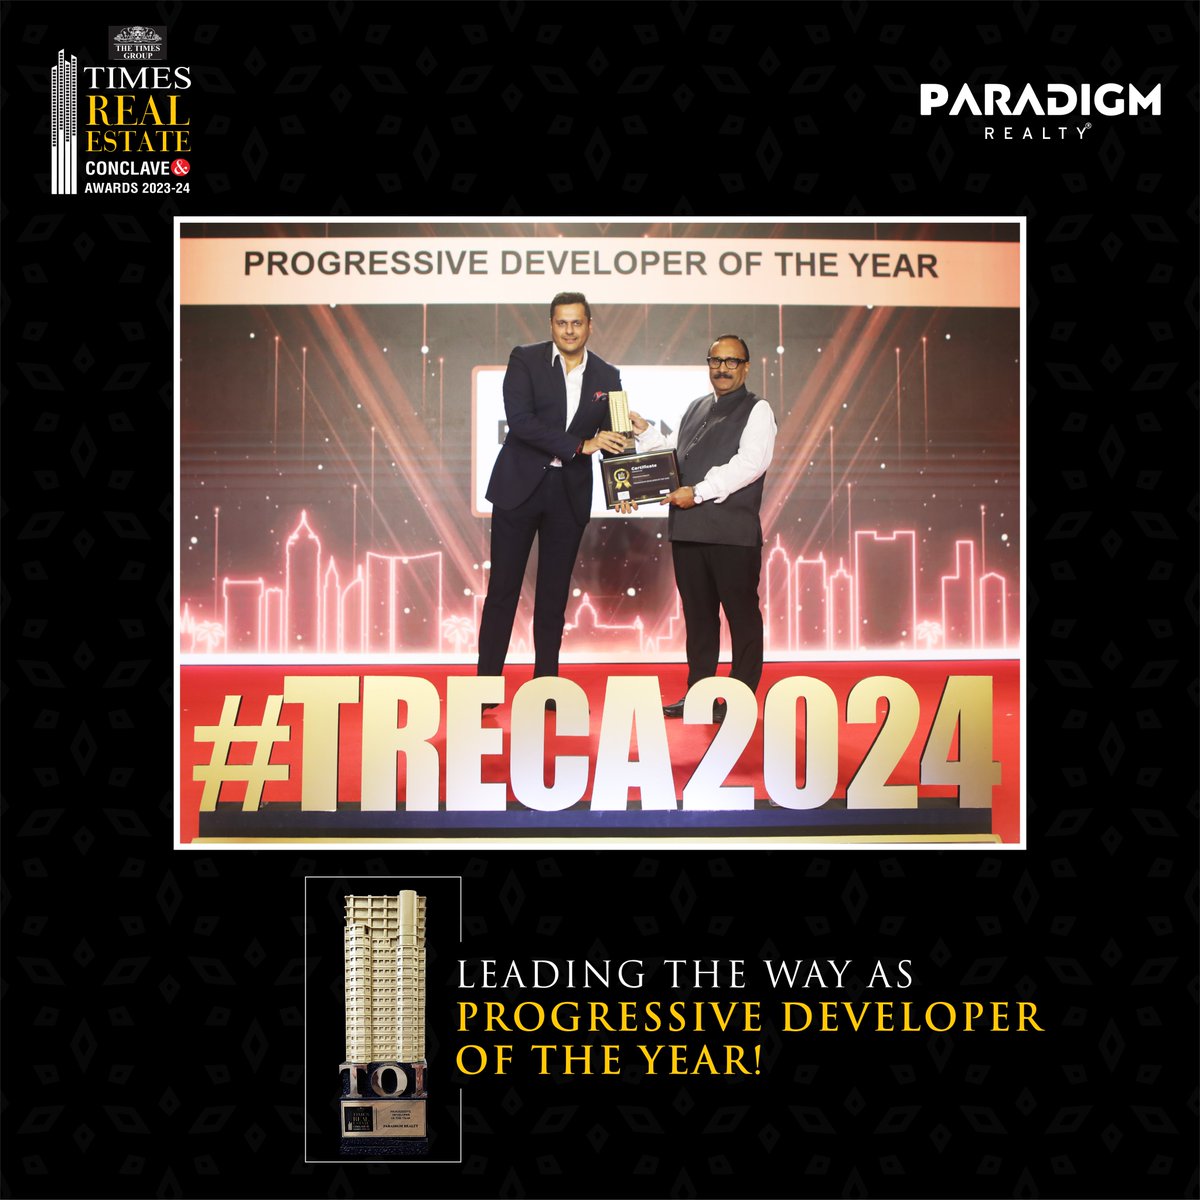 Thrilled to announce that Paradigm Realty has been honored as the Progressive Developer Of The Year by Hon. Minister of Housing, Maharashtra - Shri. Atul Save Ji at Times Real Estate Conclave & Awards-2024

#ParadigmRealty #ProgressiveDeveloper #RealEstate #TimesAwards #Conclave